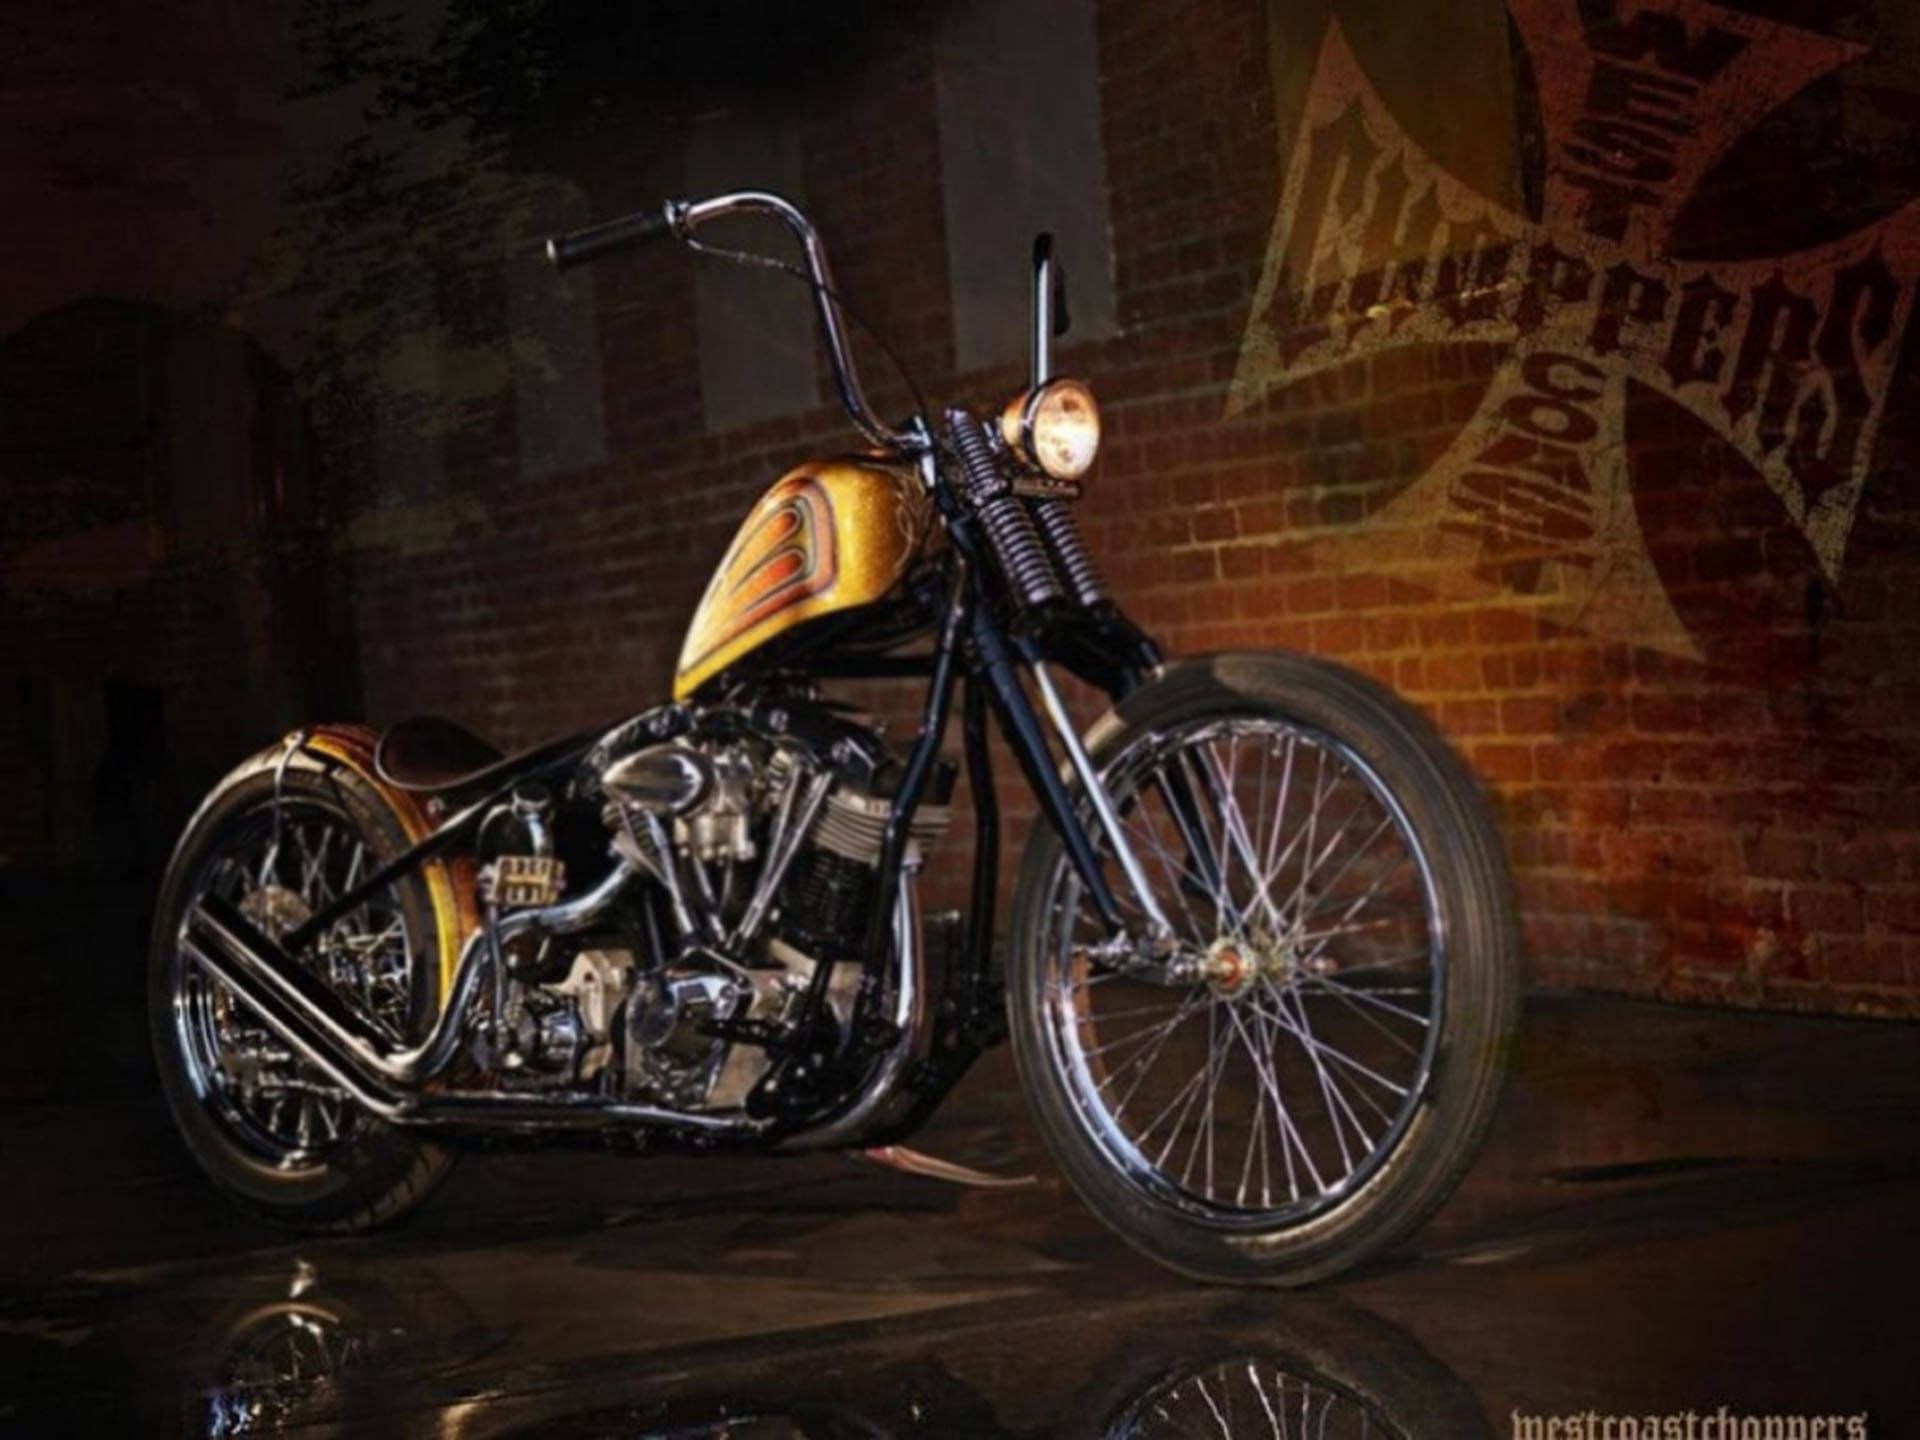 Used 2005 West Coast Choppers Choppers For Life Jesse James Custom Chopper  For Sale ($55,900)